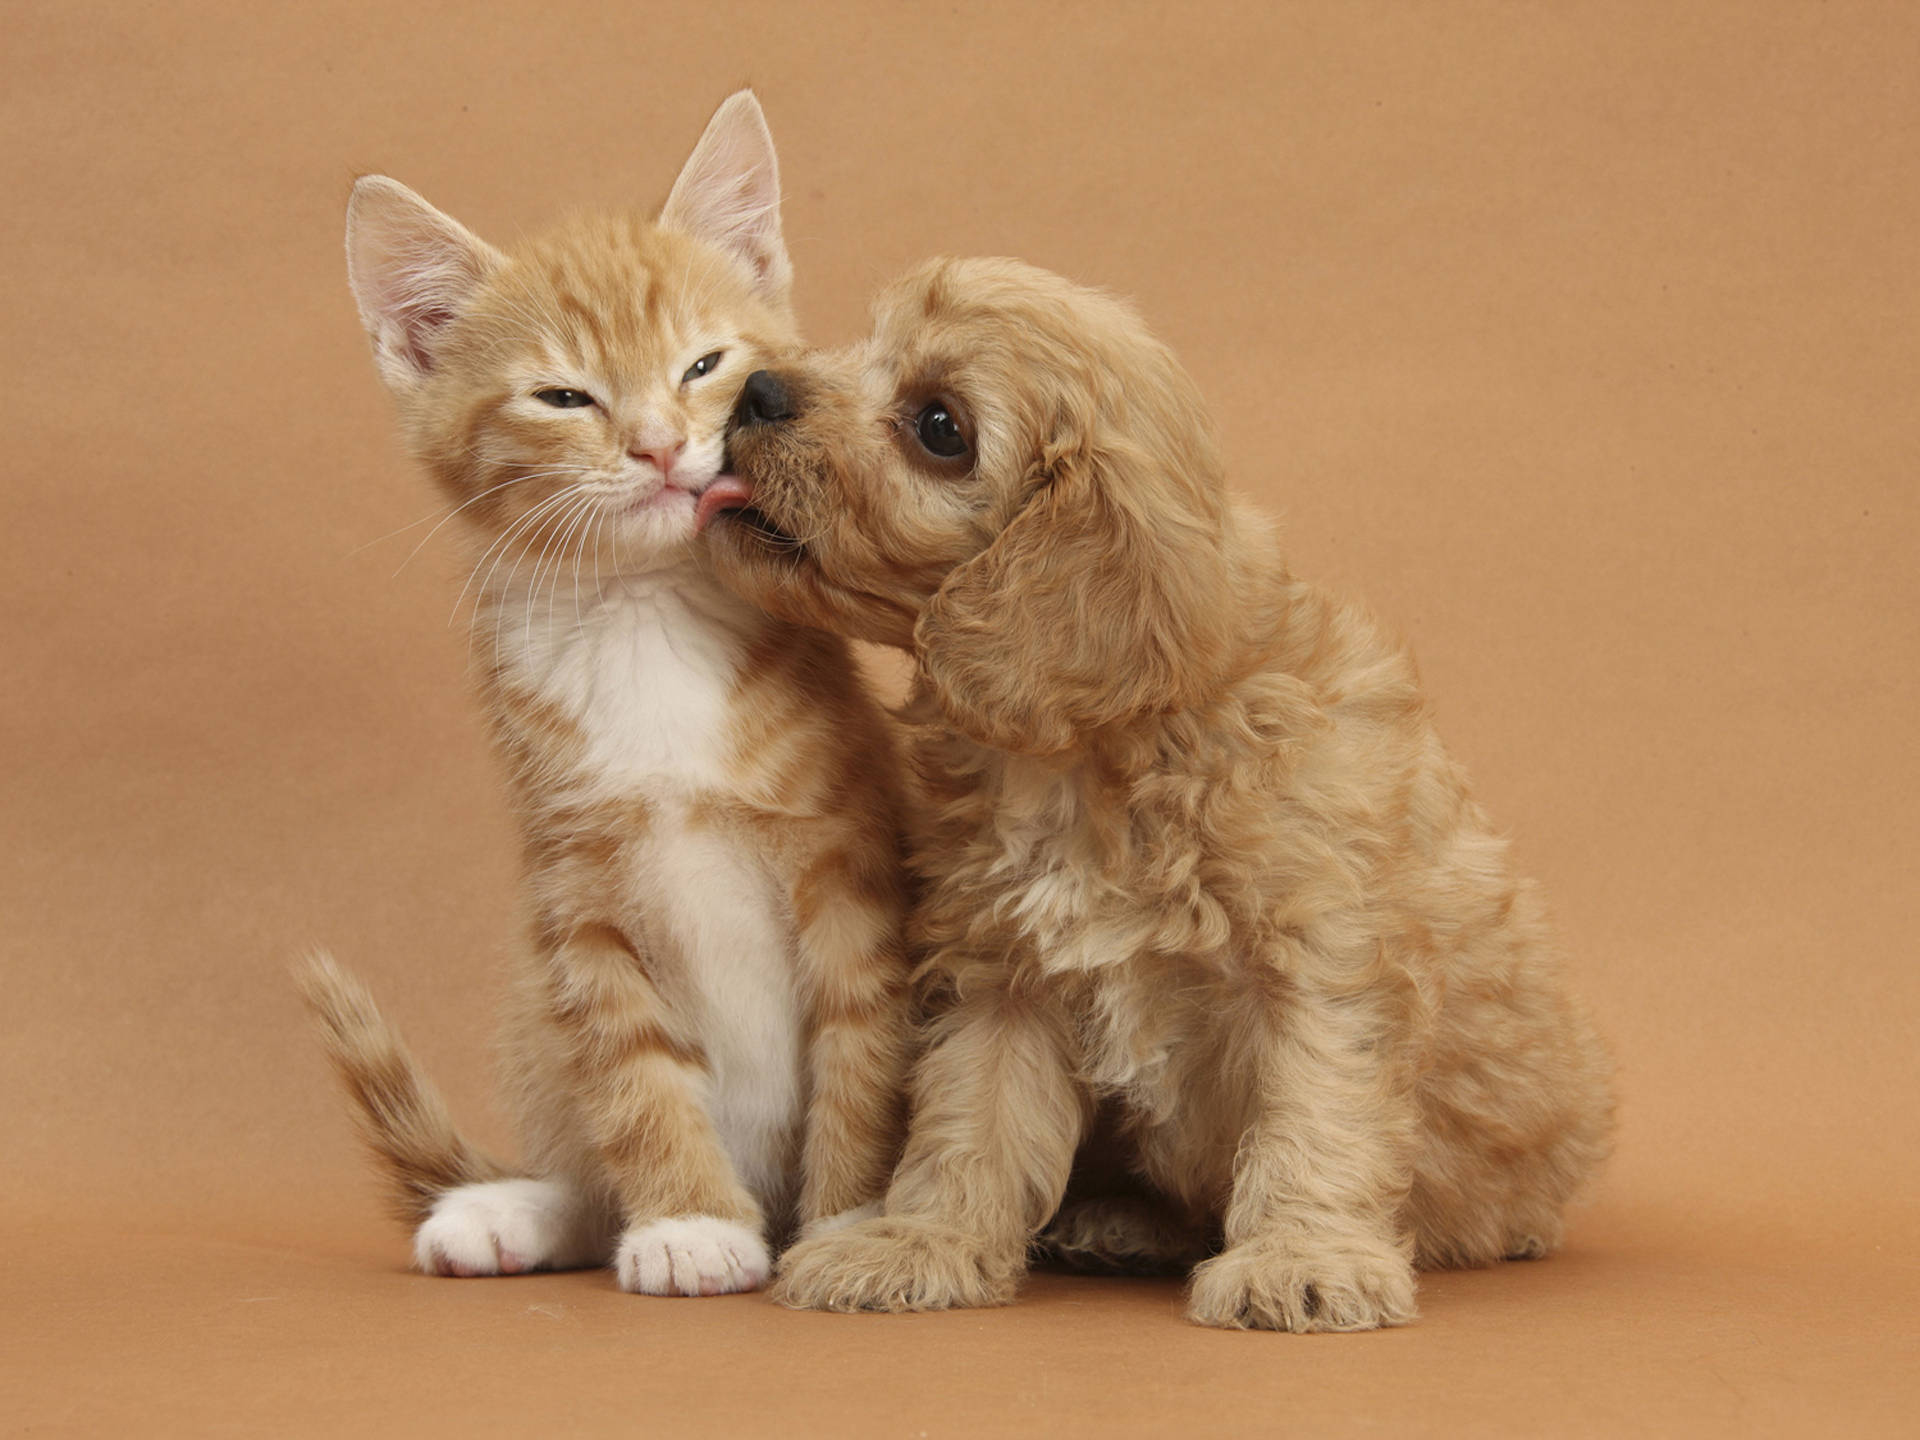 A Dog And Cat Sharing A Sweet Moment